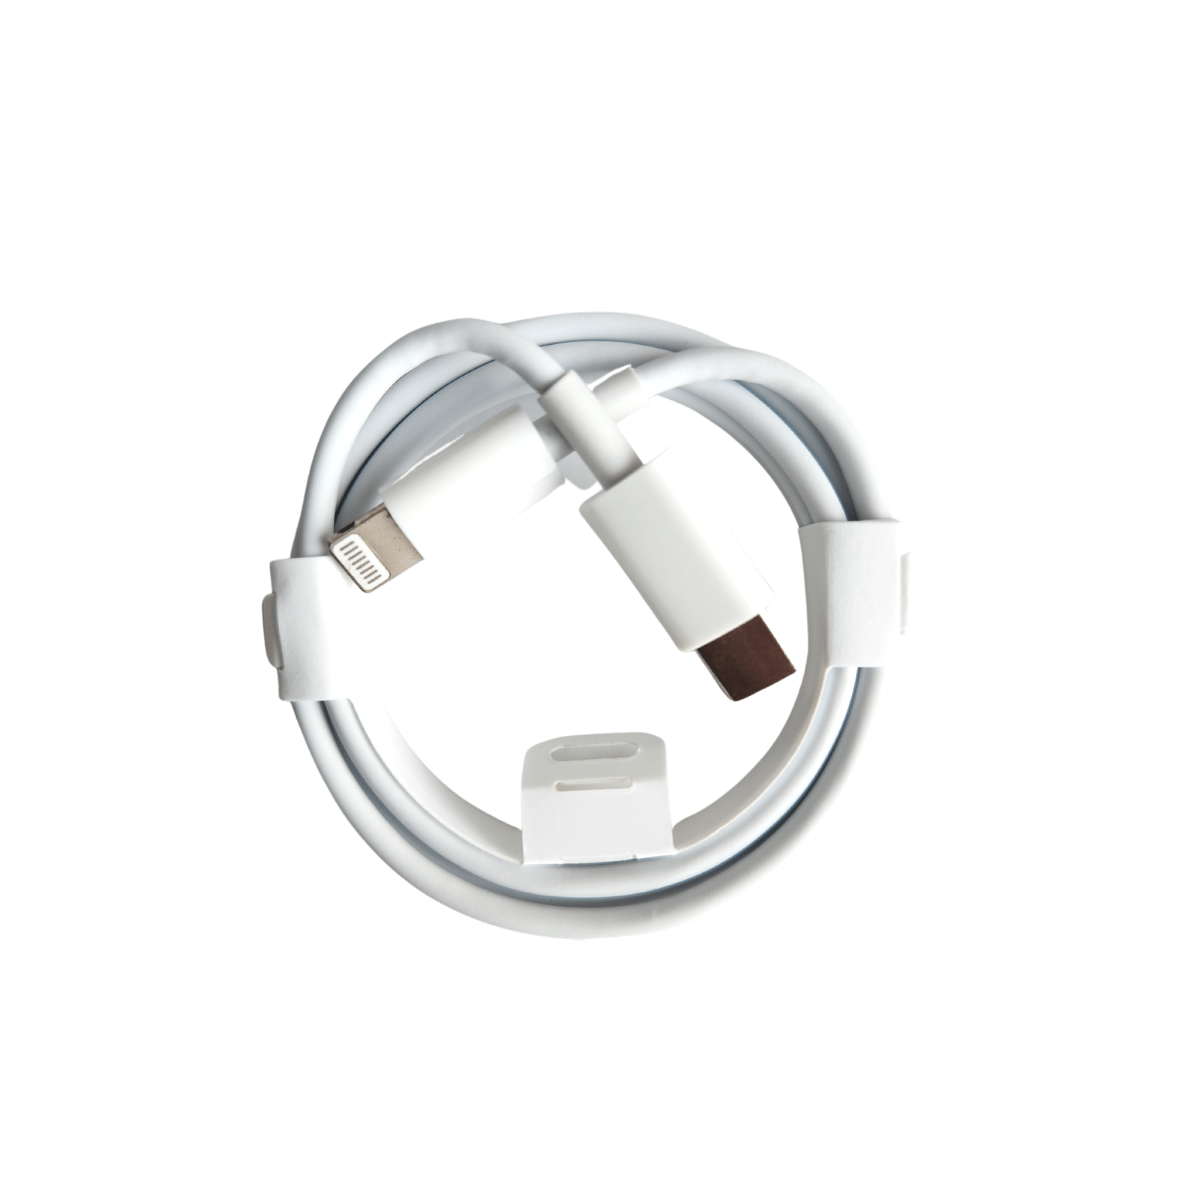 Cable Usb Tipo C A Ligthing Cargador P/ iPhone 11 12 13 C52 Color